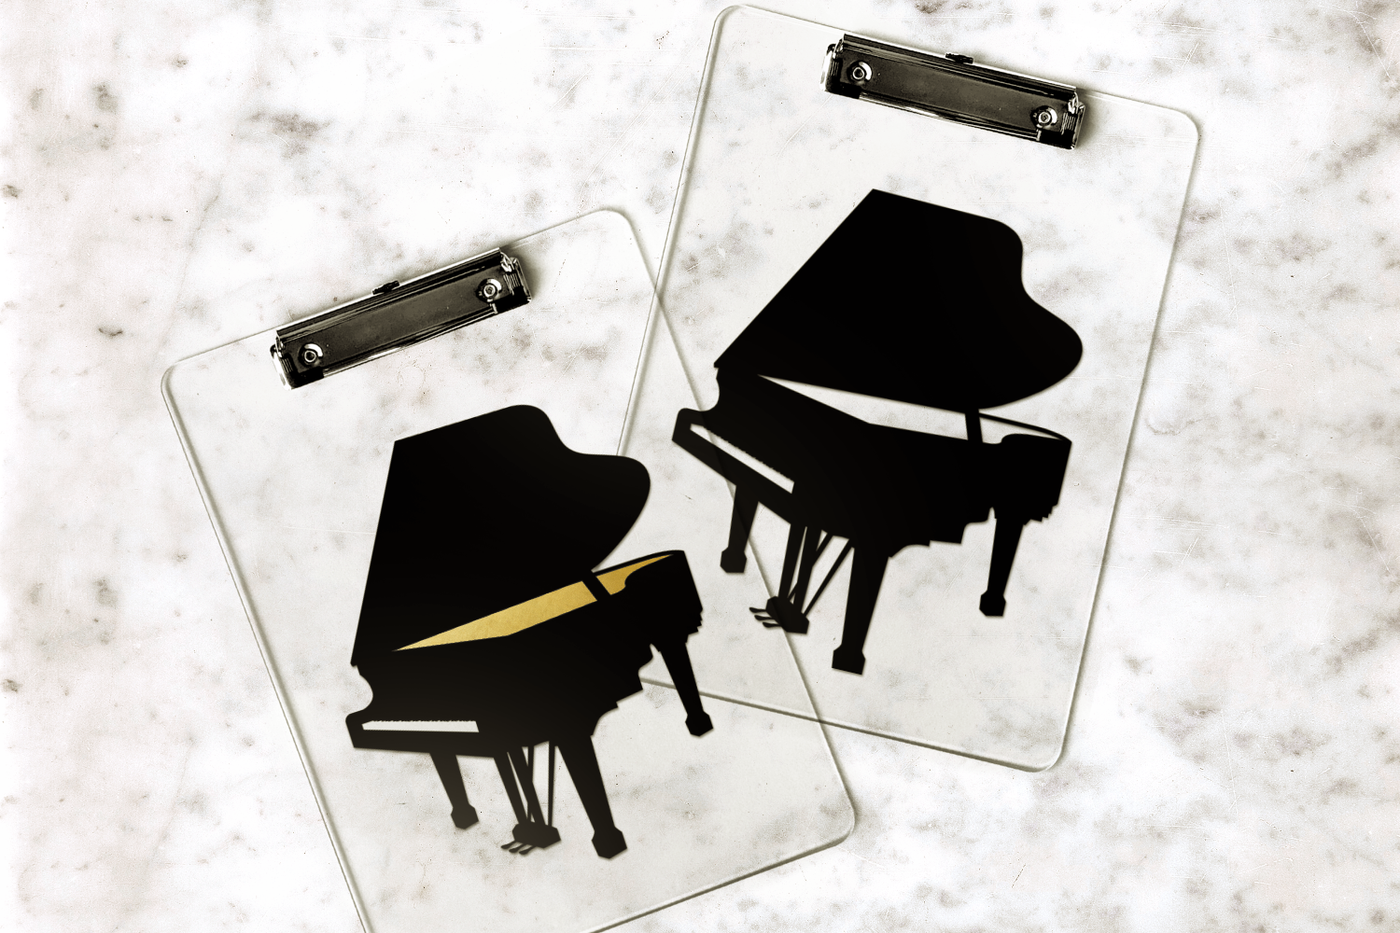 Two clipboards with a grand piano design on them.